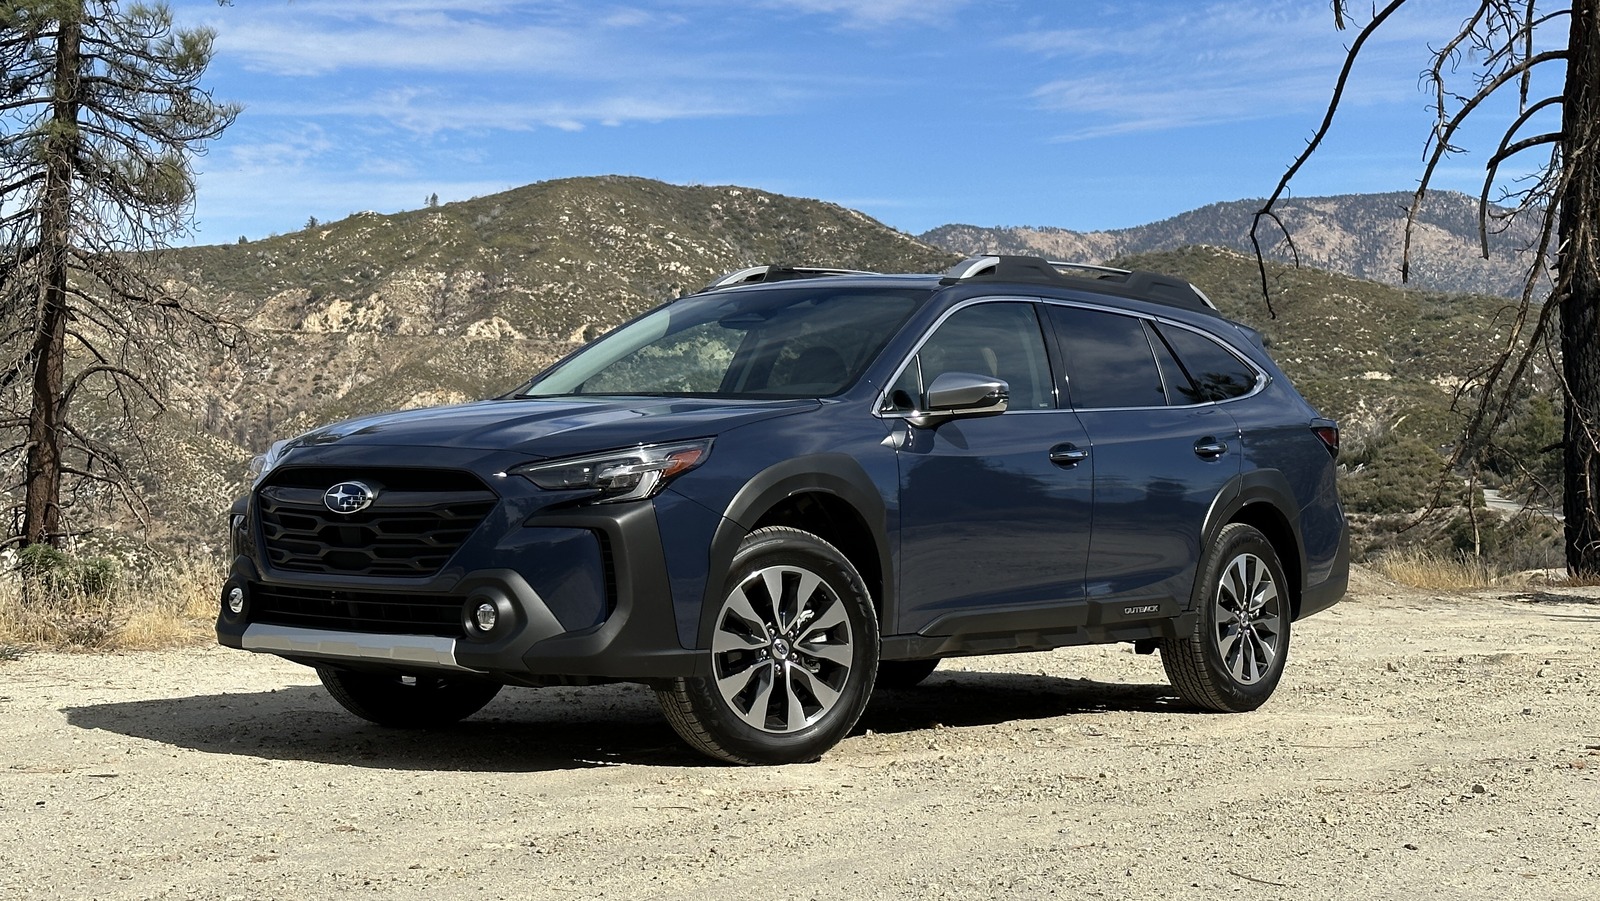 2023 Subaru Outback Review: Rugged All-Rounder Keeps On Keepin' On